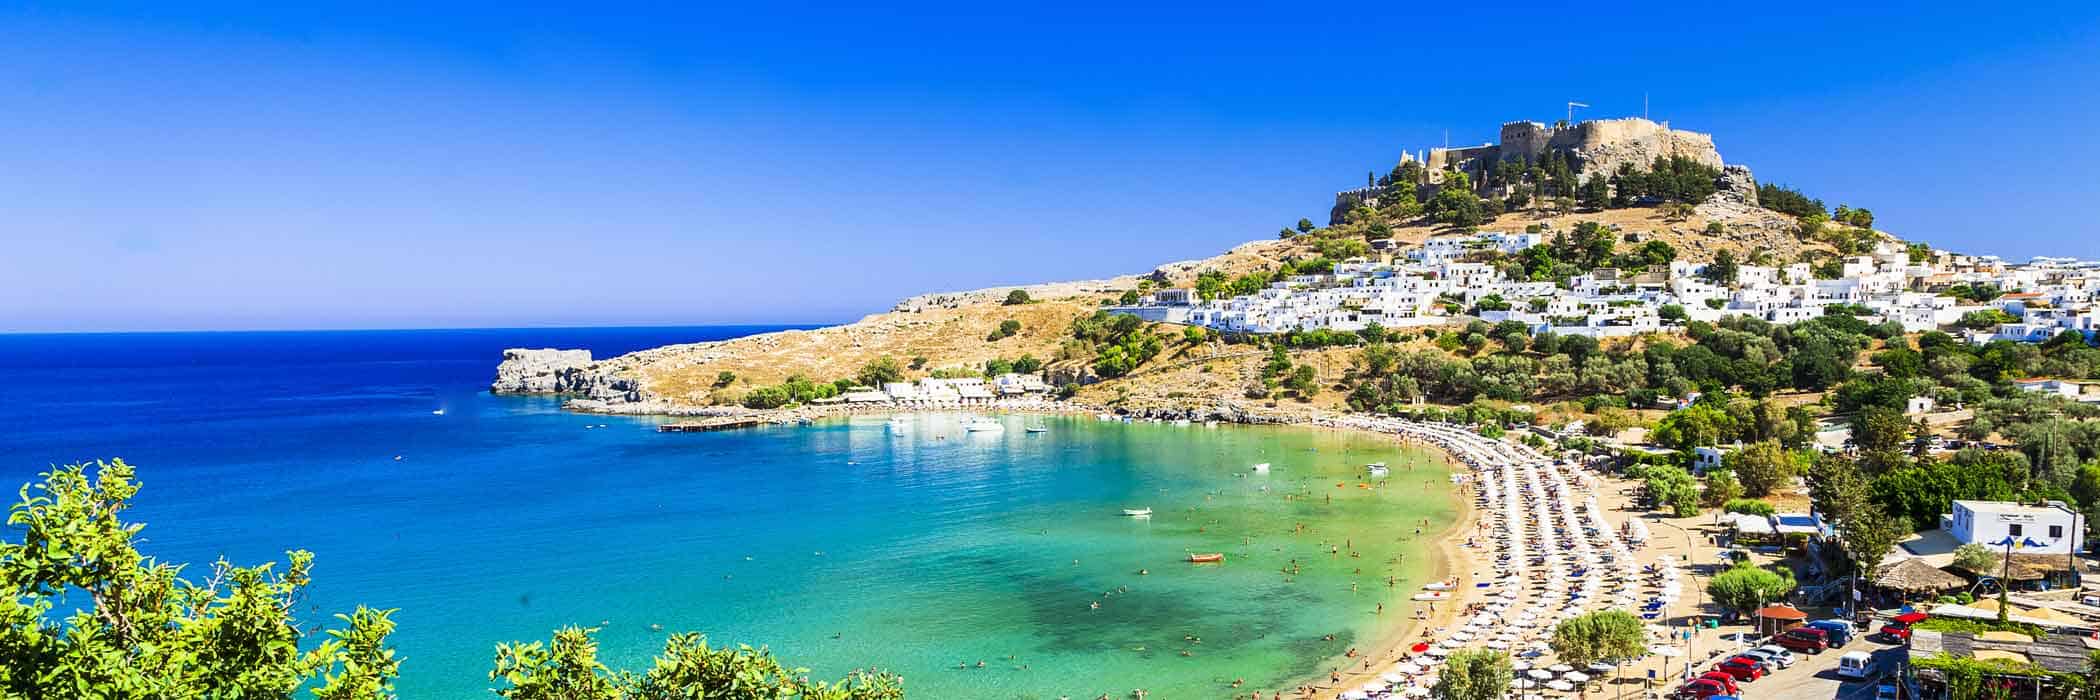 All inclusive holidays in Greece